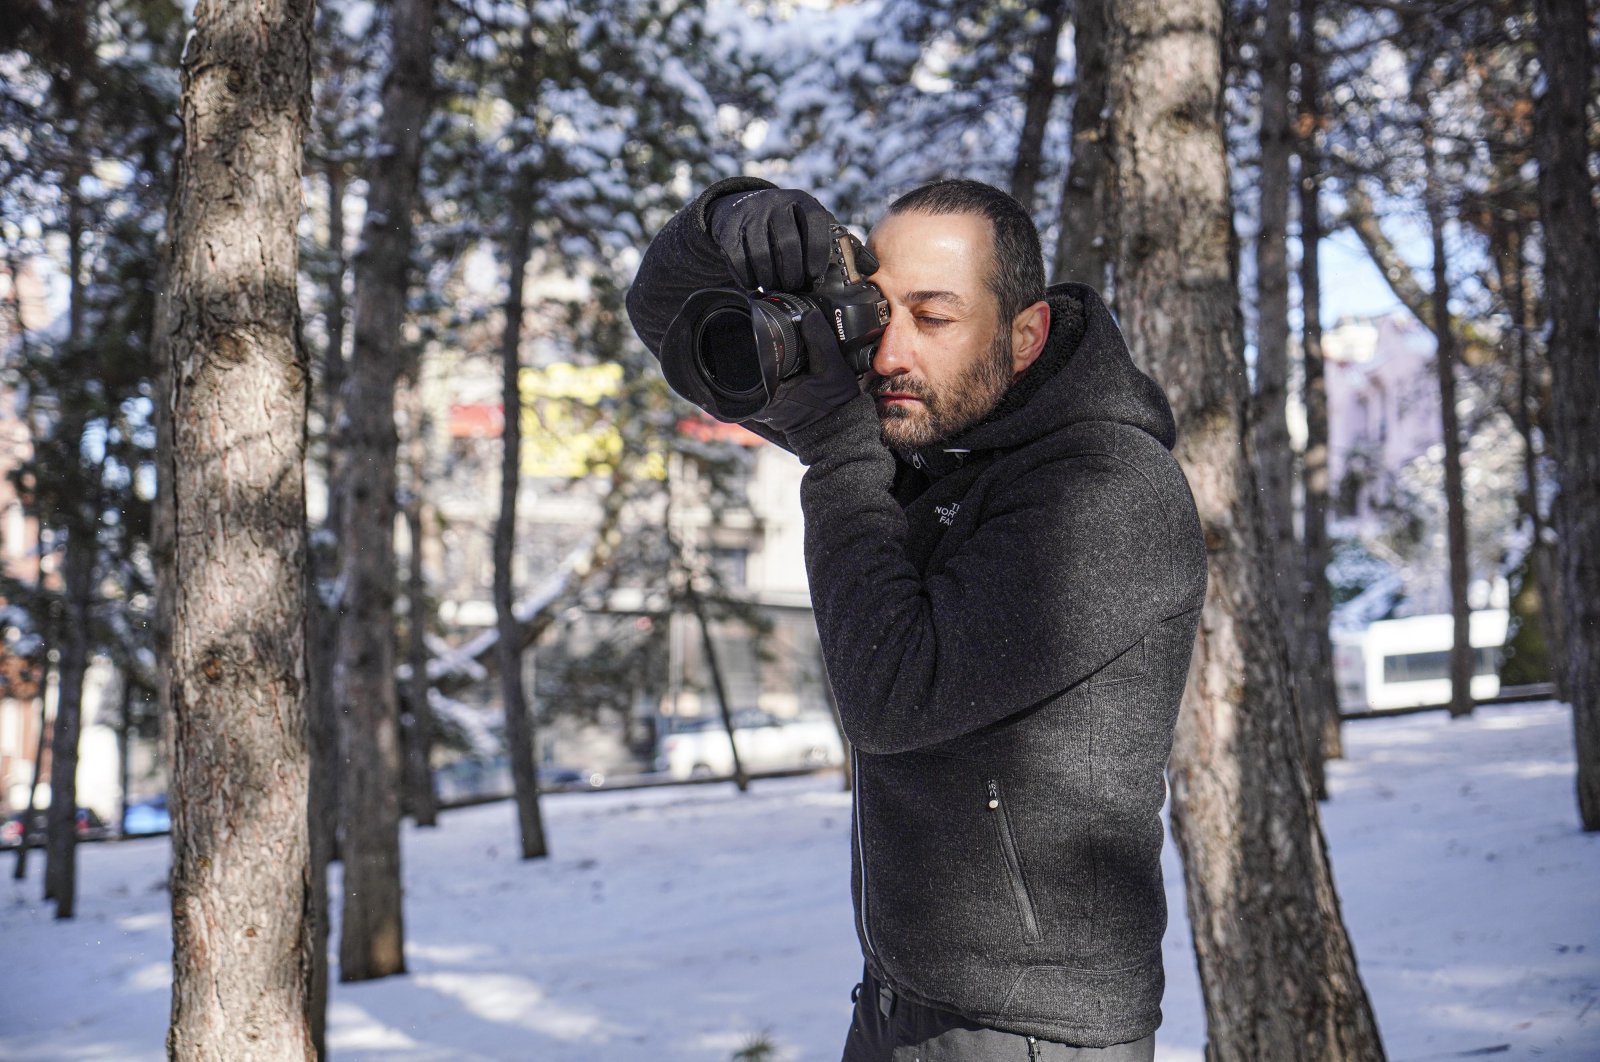 Aytek Çetin in action in the woods in Ankara with the camera he used to take the photos that crowned him "Landscape Photographer of the Year" in Australia, Ankara, Turkey, Feb. 5, 2022. (DHA Photo)